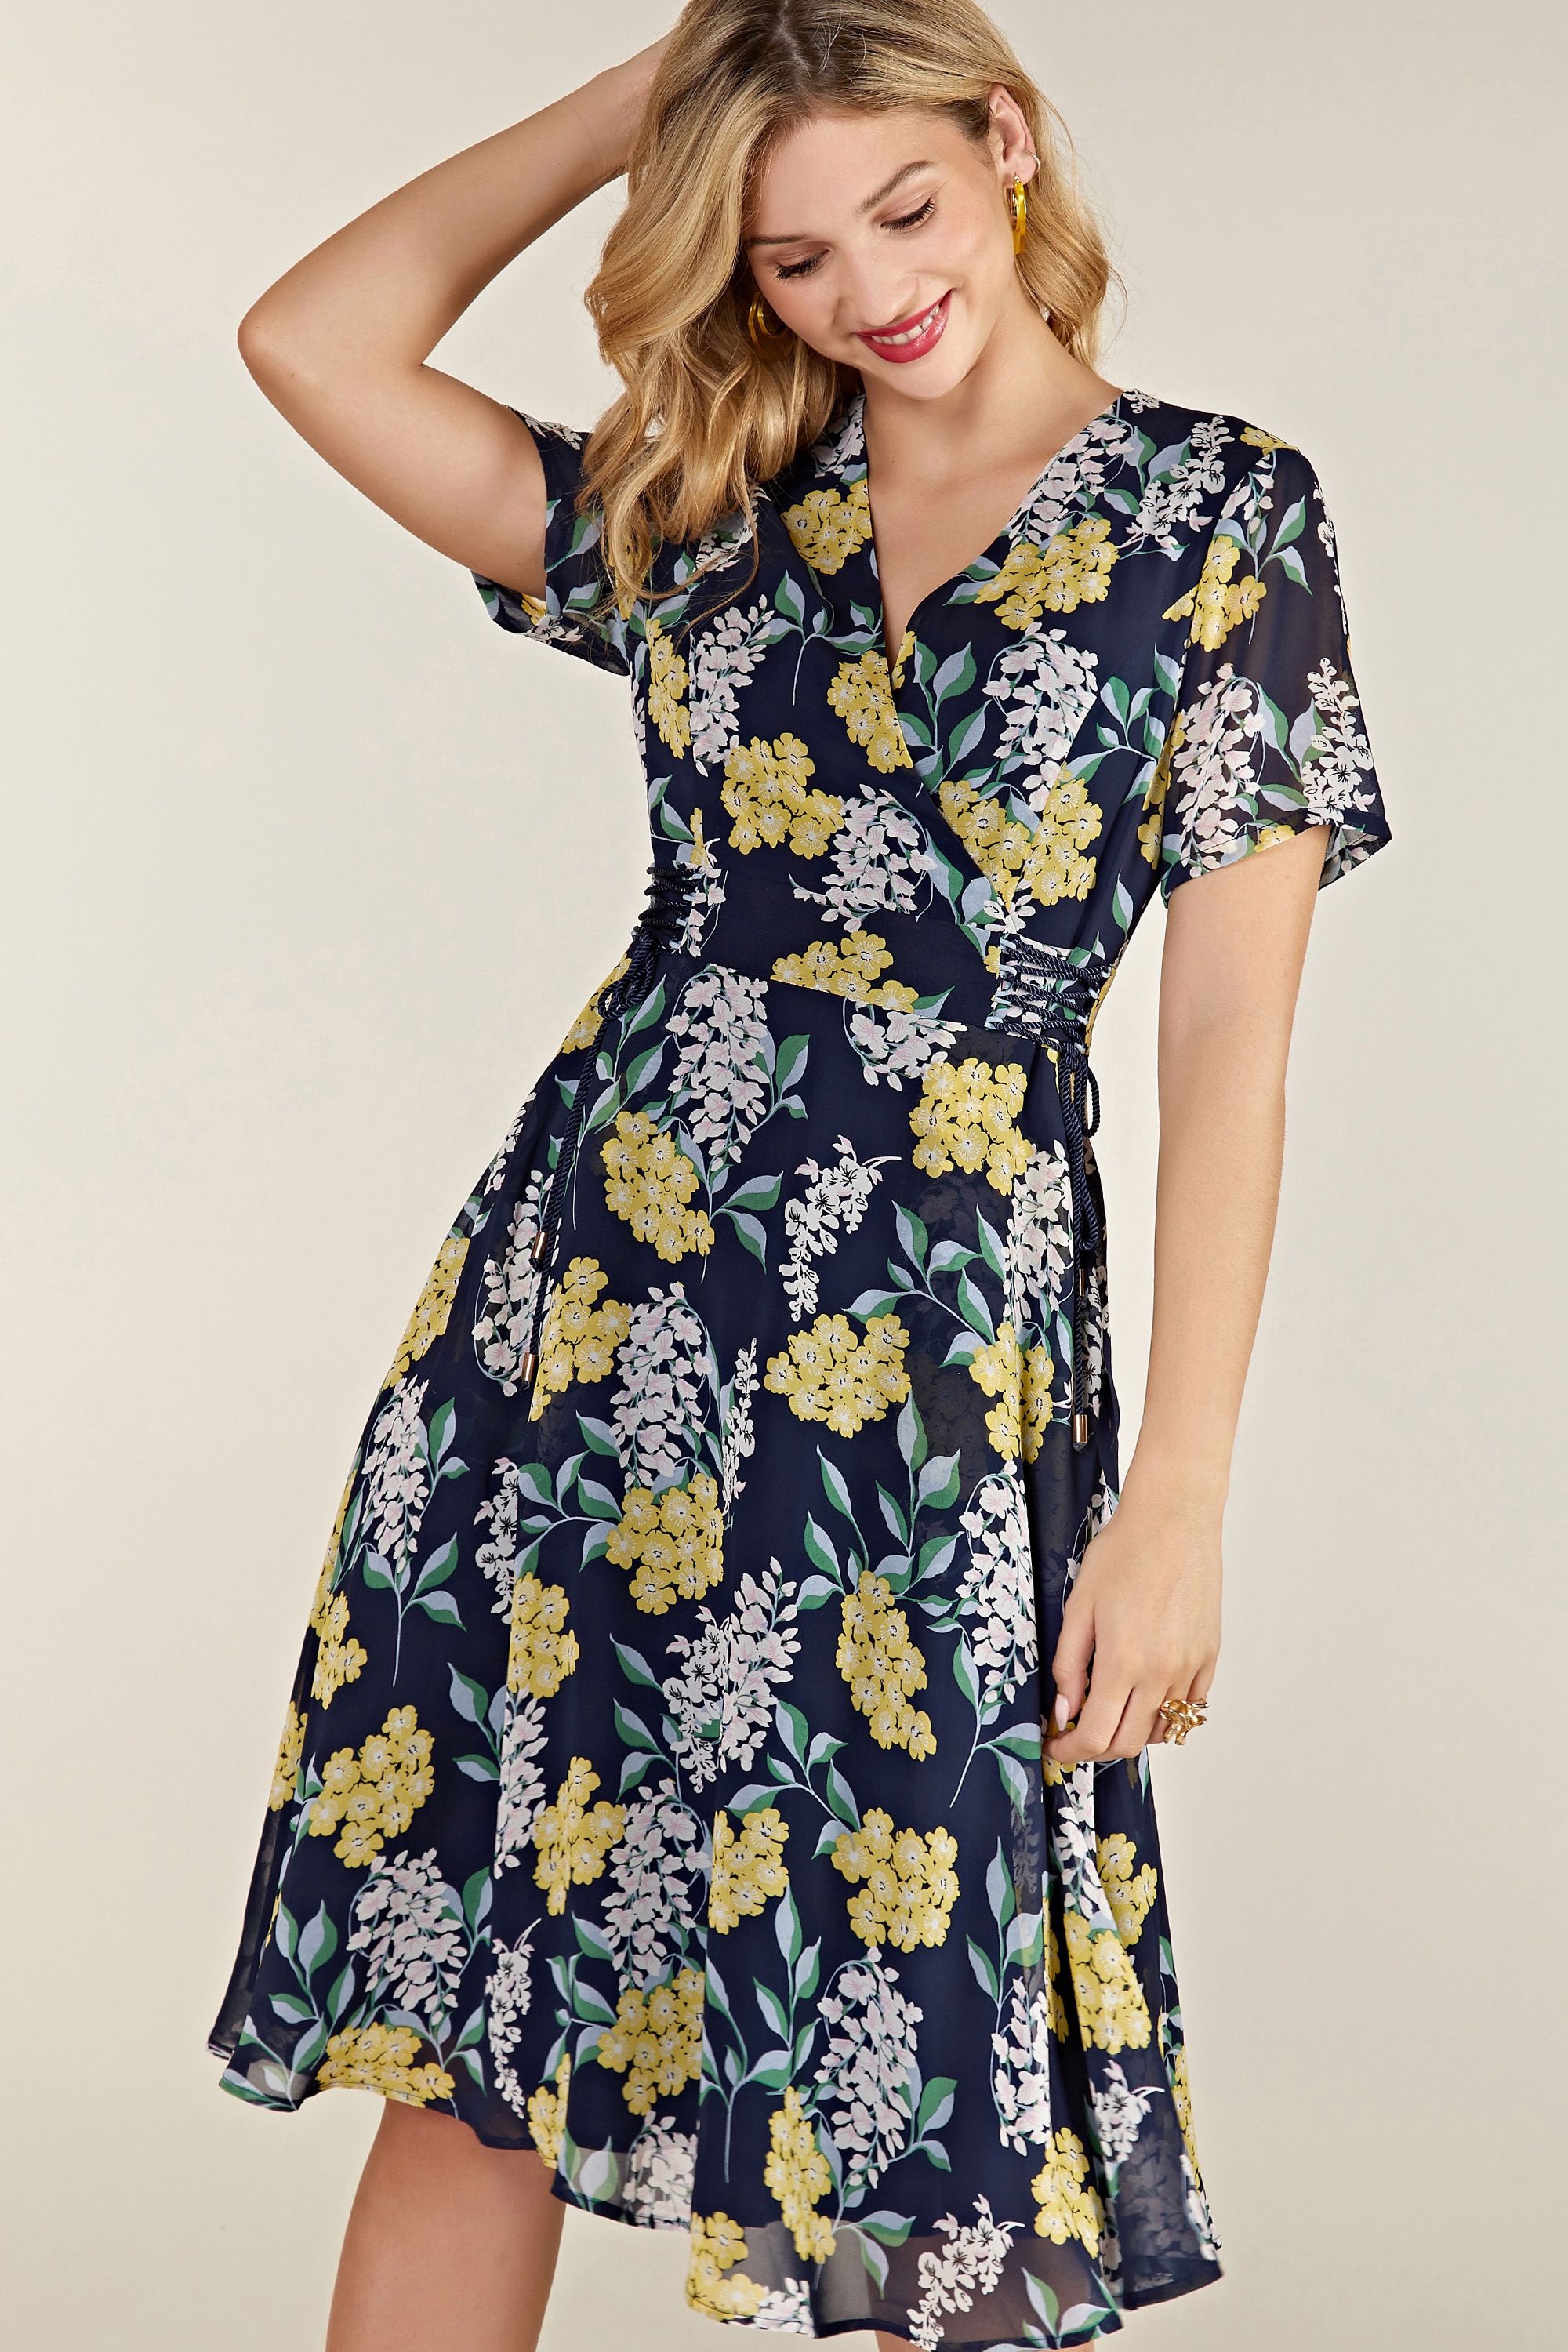 Spring Floral Dress With Tie Detail